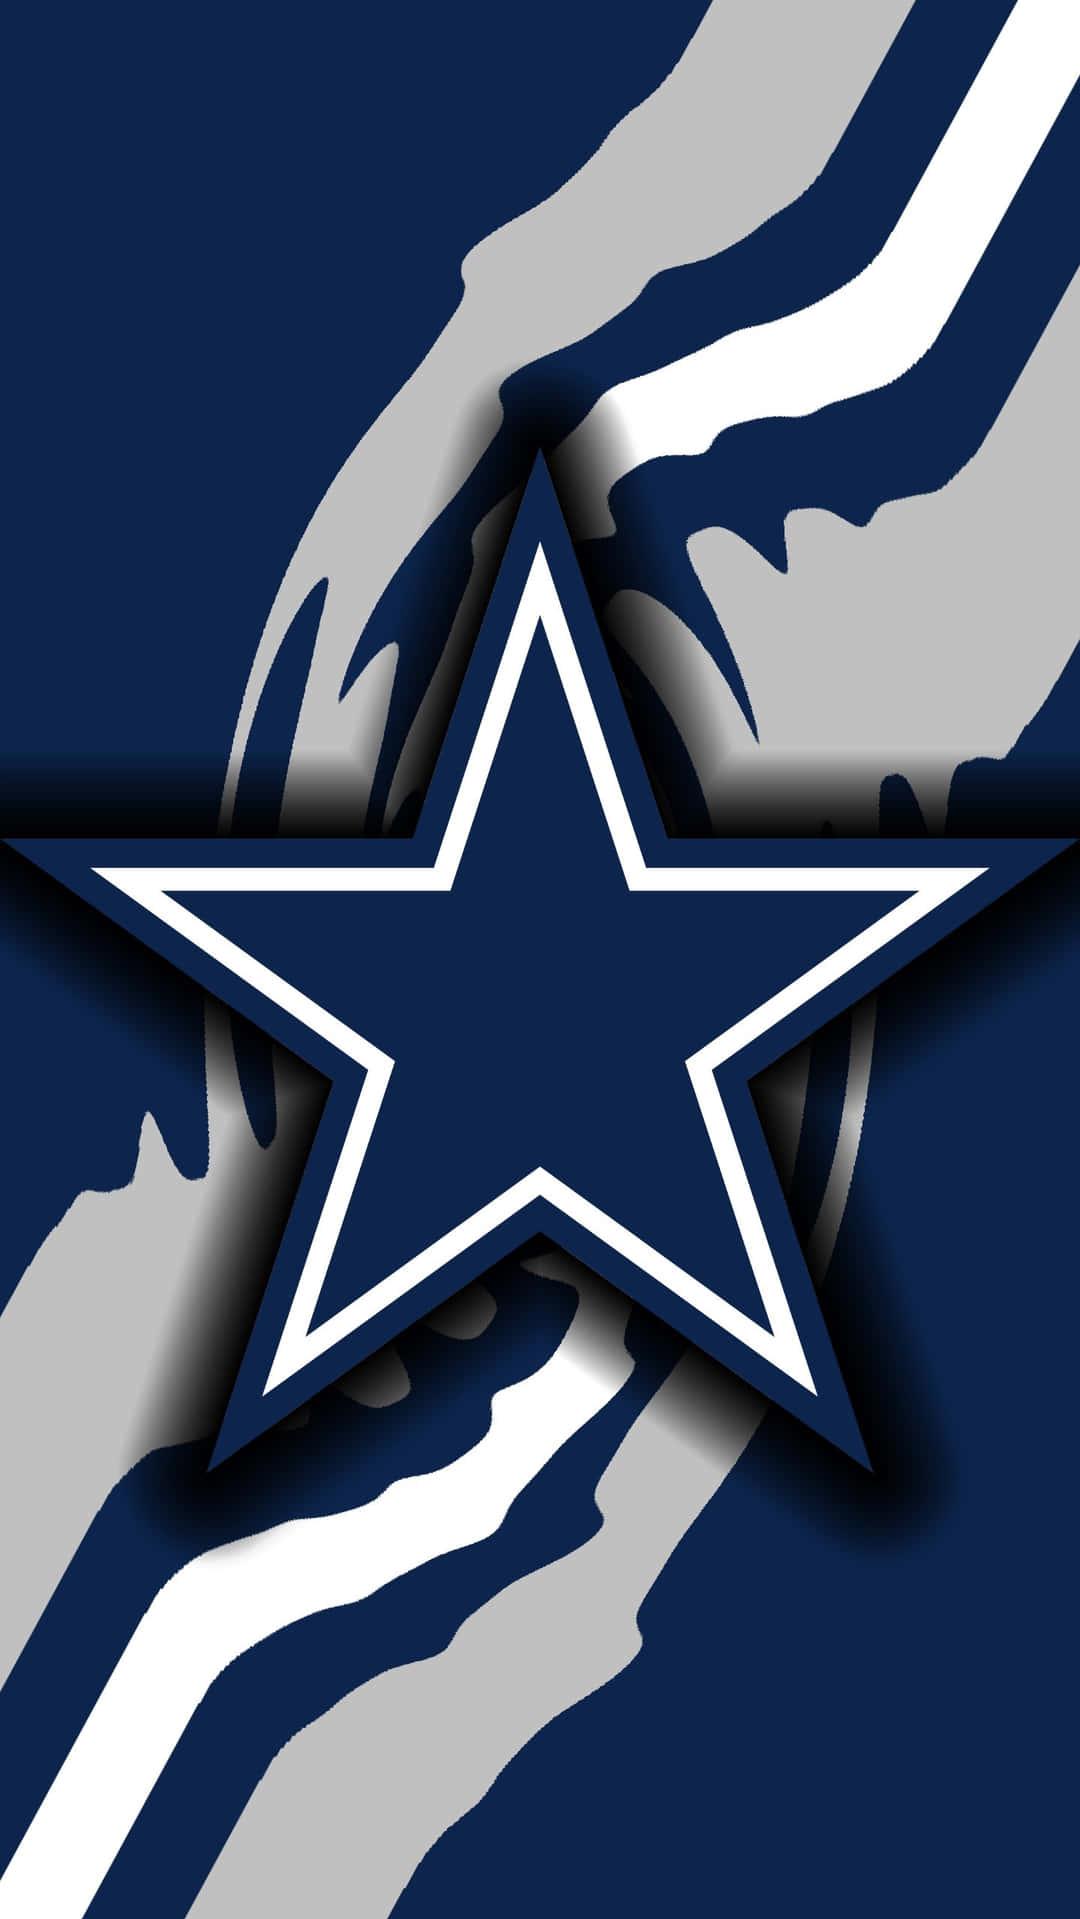 Represent Your Team With The Official Dallas Cowboys